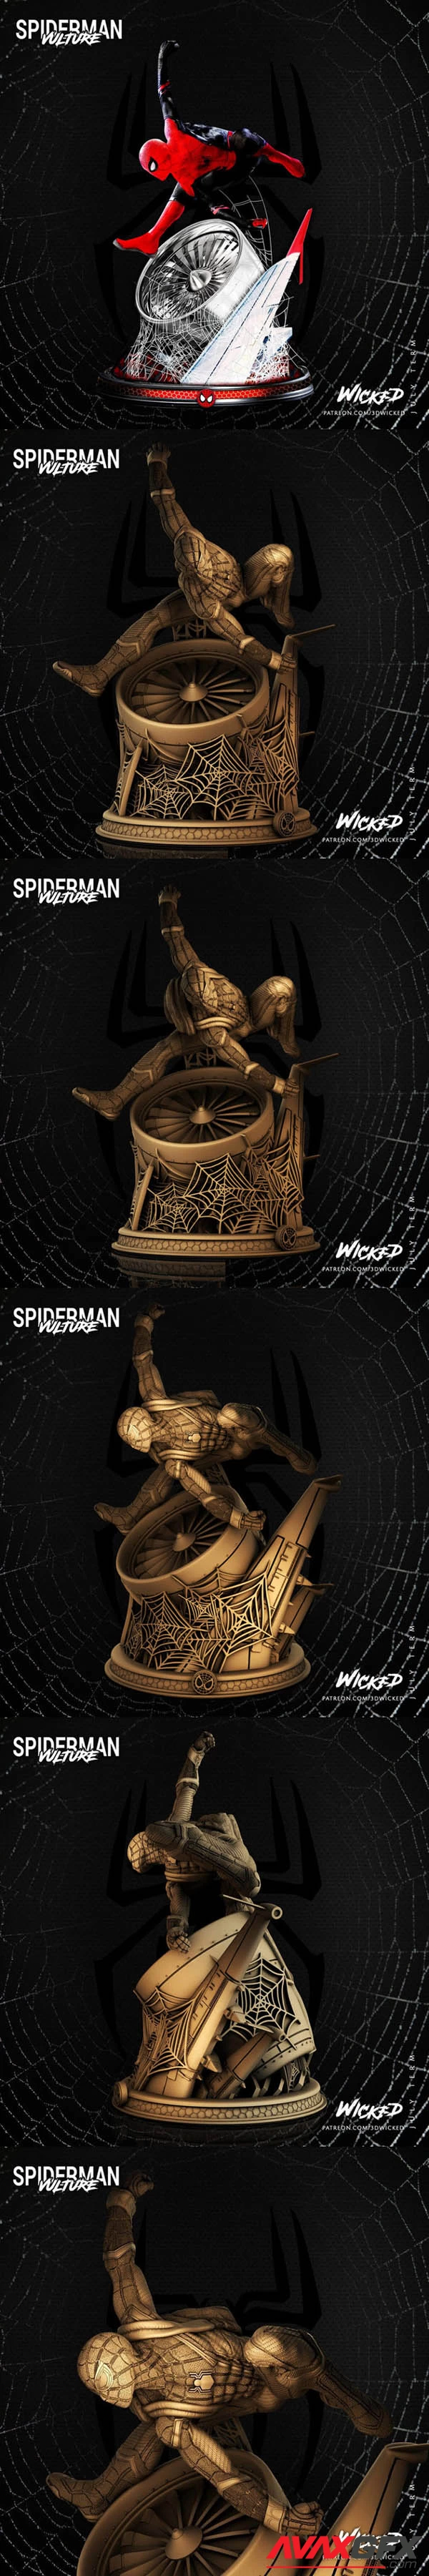 Wicked – Spider Man – 3D Print